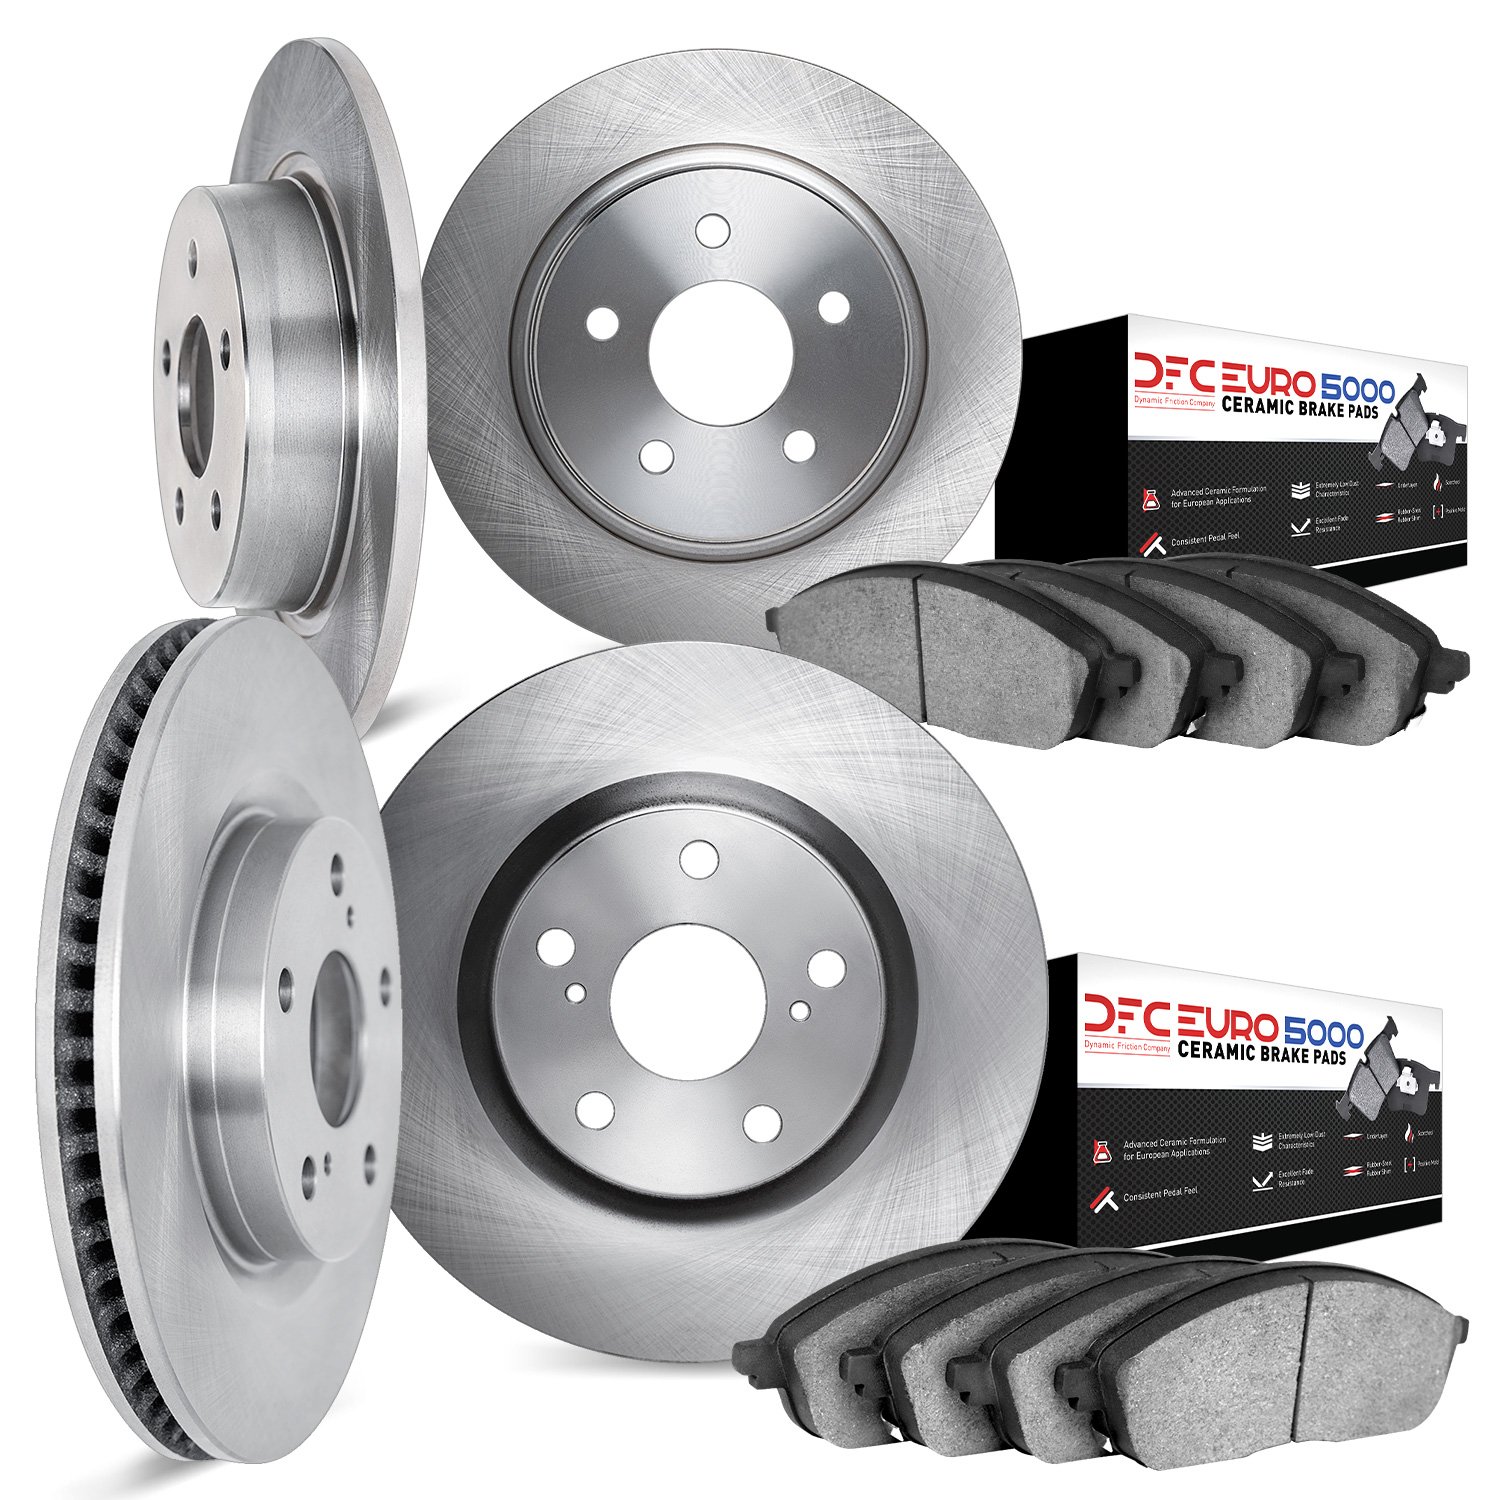 6604-12833 Brake Rotors w/5000 Euro Ceramic Brake Pads, 2018-2020 Volvo, Position: Front and Rear